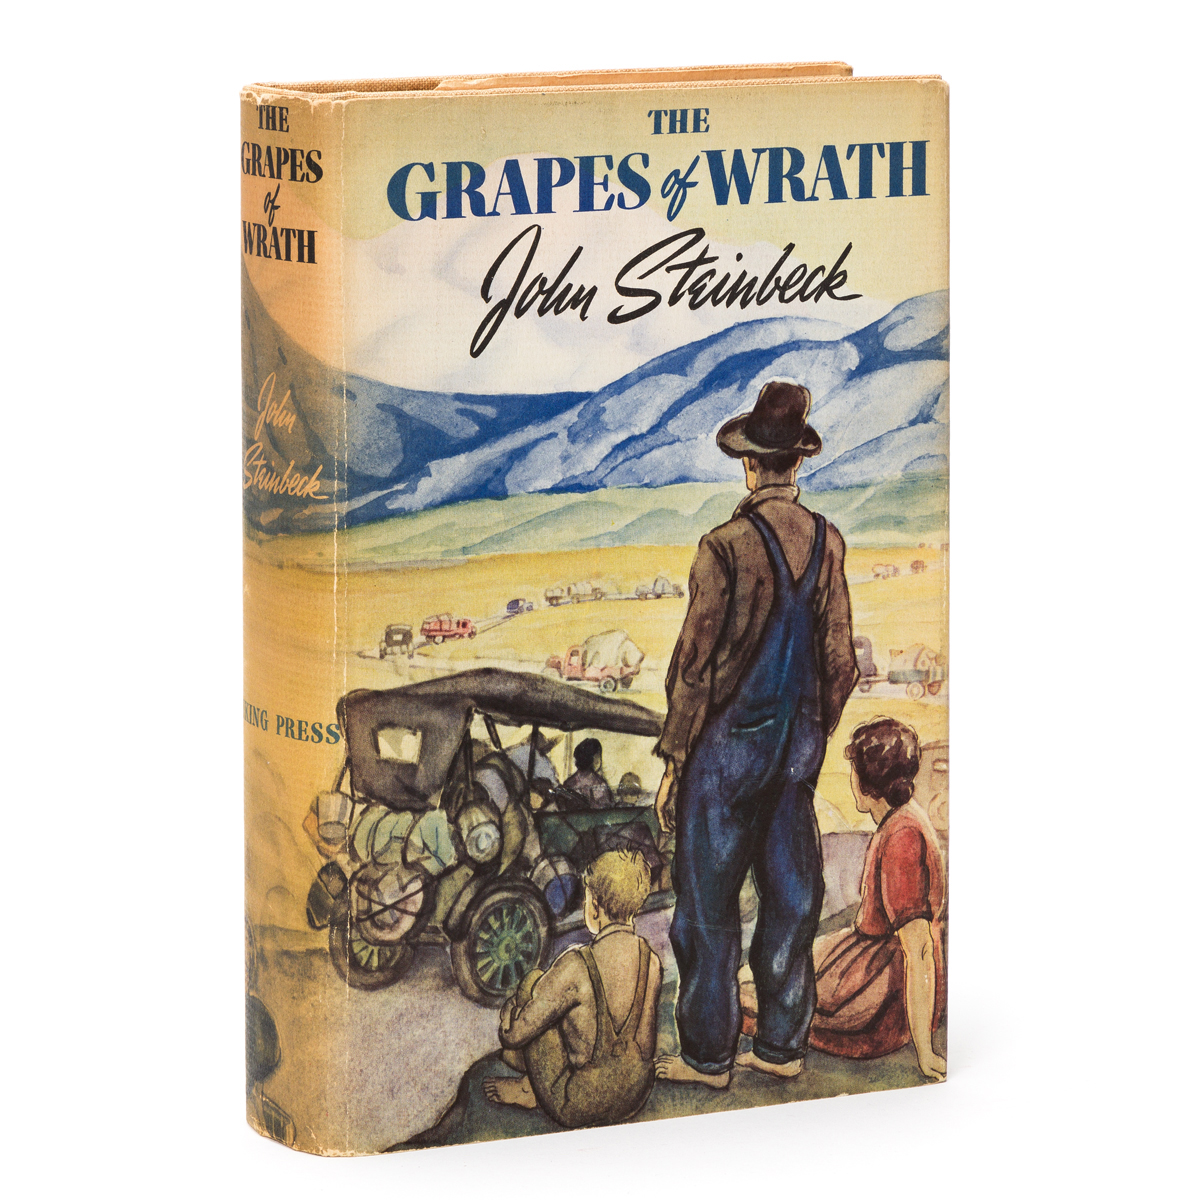 STEINBECK, JOHN. The Grapes of Wrath.